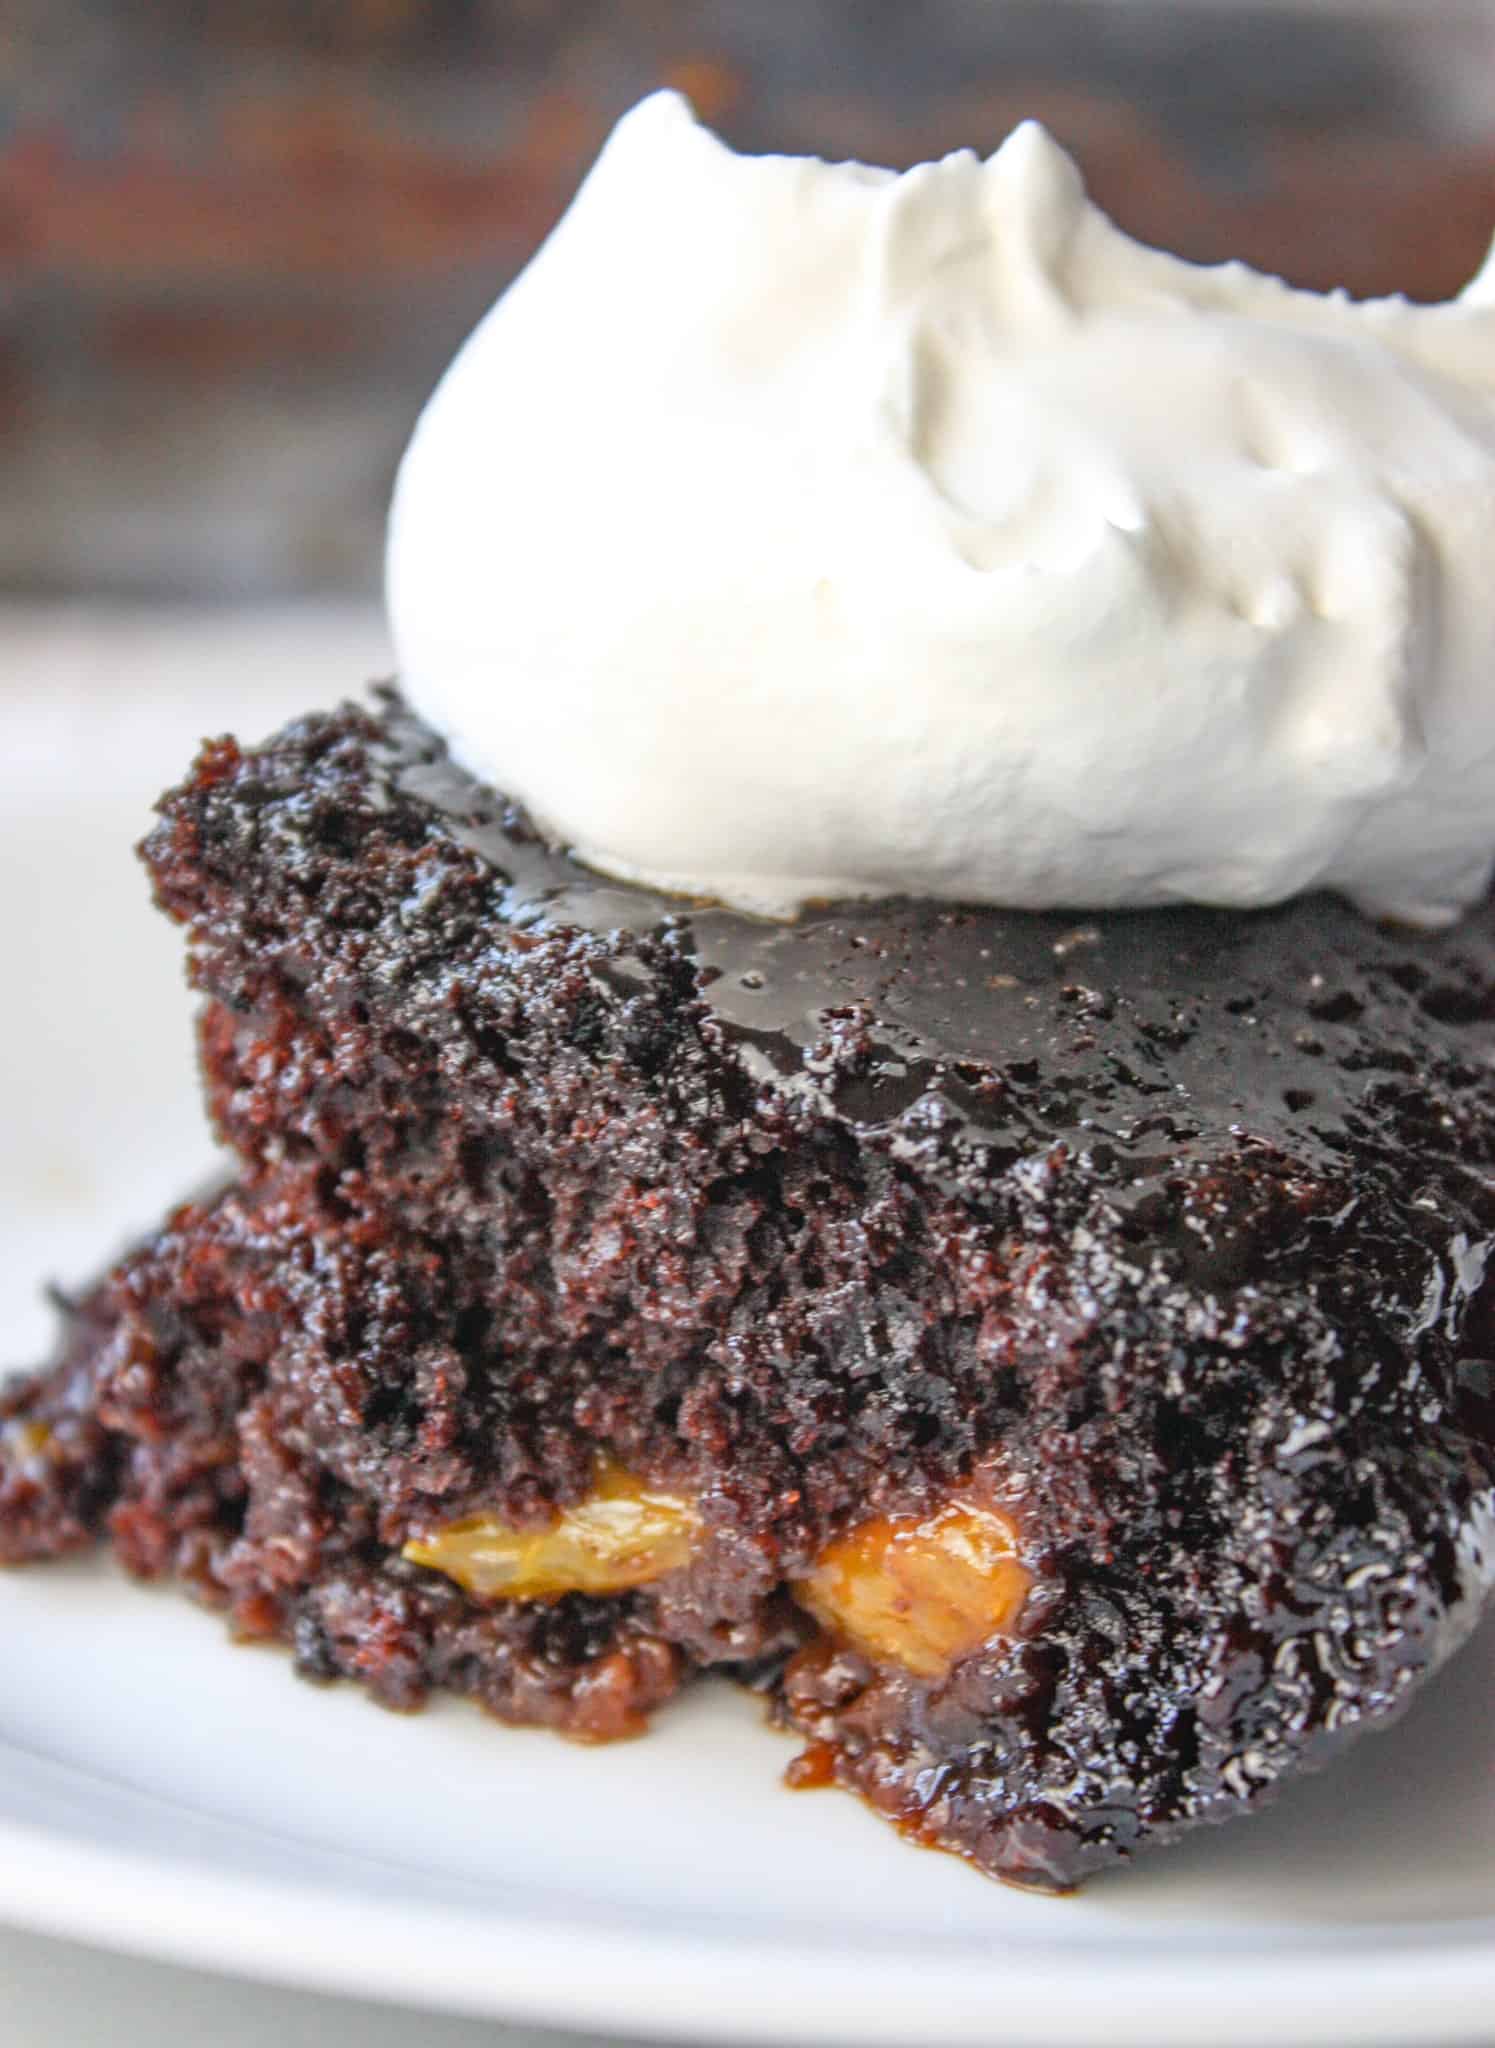 Chocolate Mandarin Cake is a subtle blend of citrus and decadence!  This gluten free cake is a great dessert to serve any time of the year.